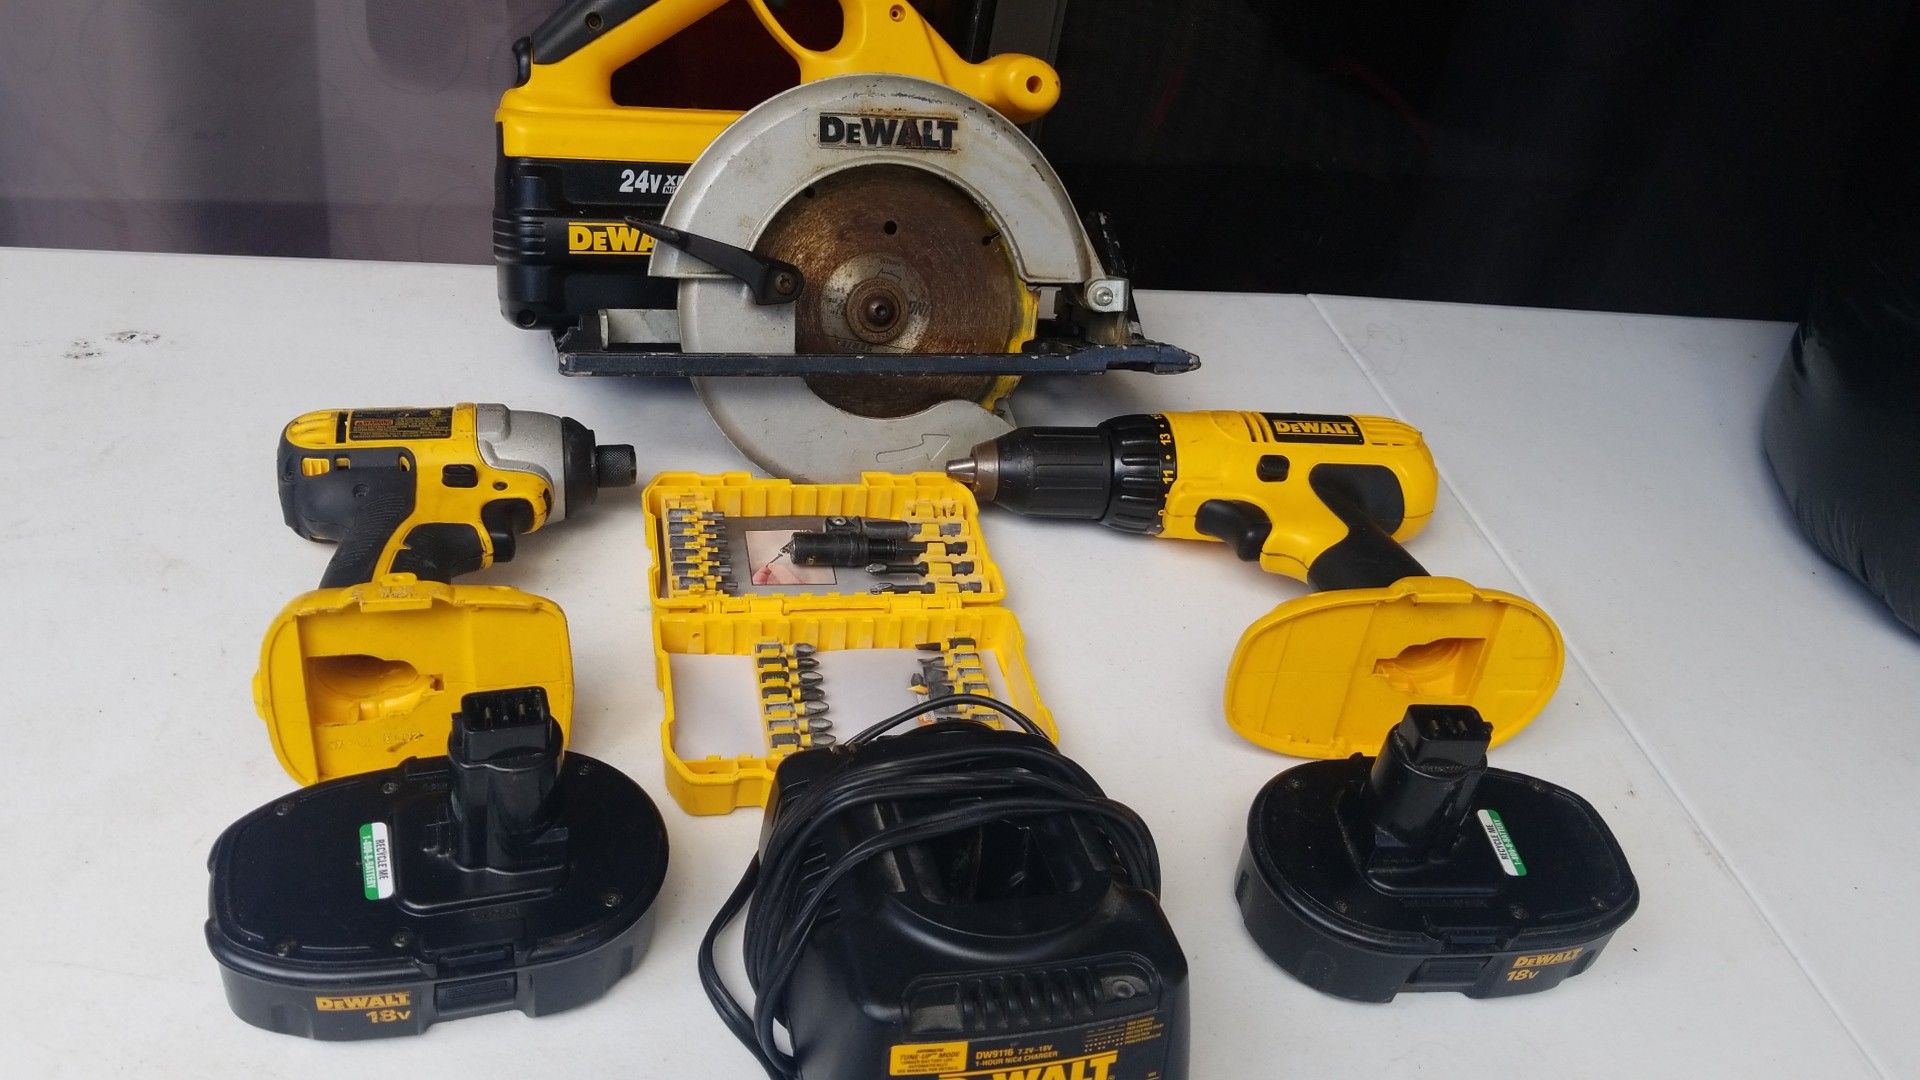 Dewalt hammer cordless drill and Table Saw and tool set